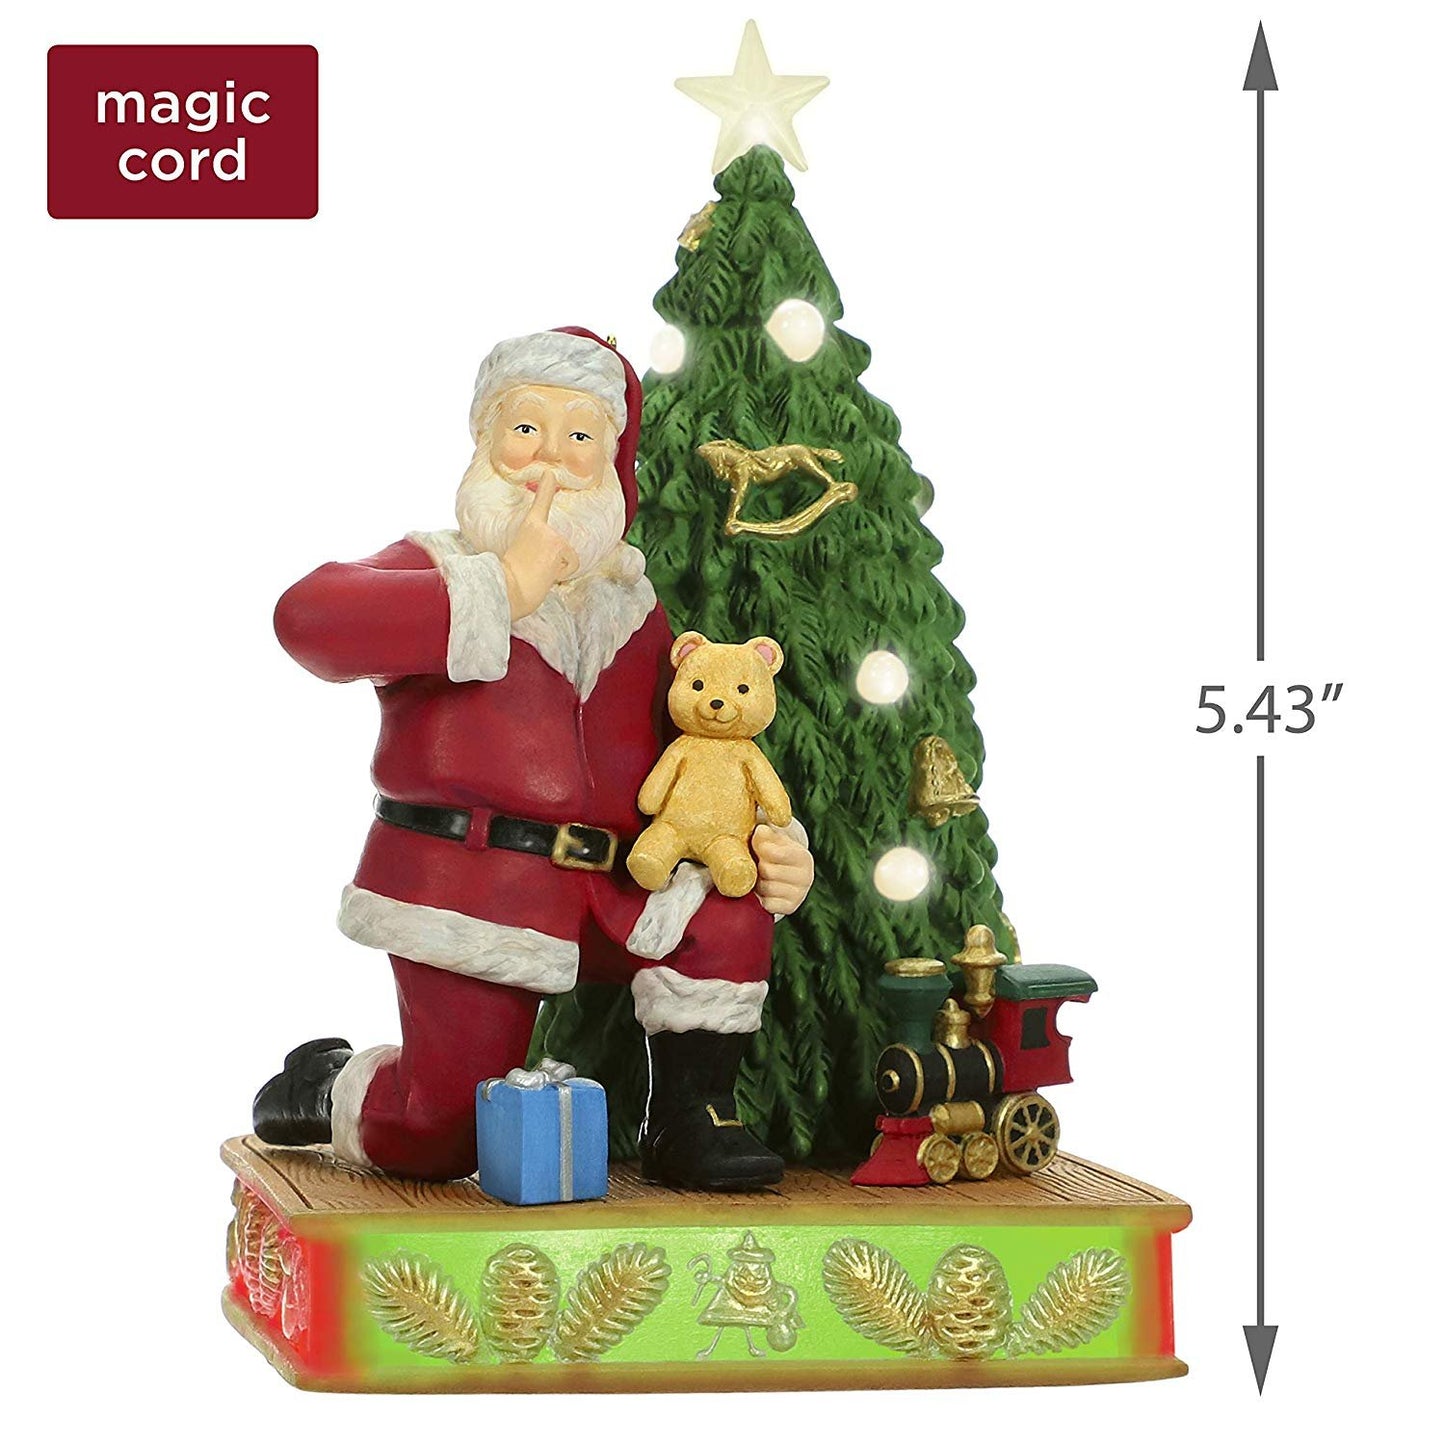 Hallmark Keepsake Ornament 2019 Year Dated Once Upon Santa Claus with Toys Musical with Light (Plays O Christmas Tree Song), Oh